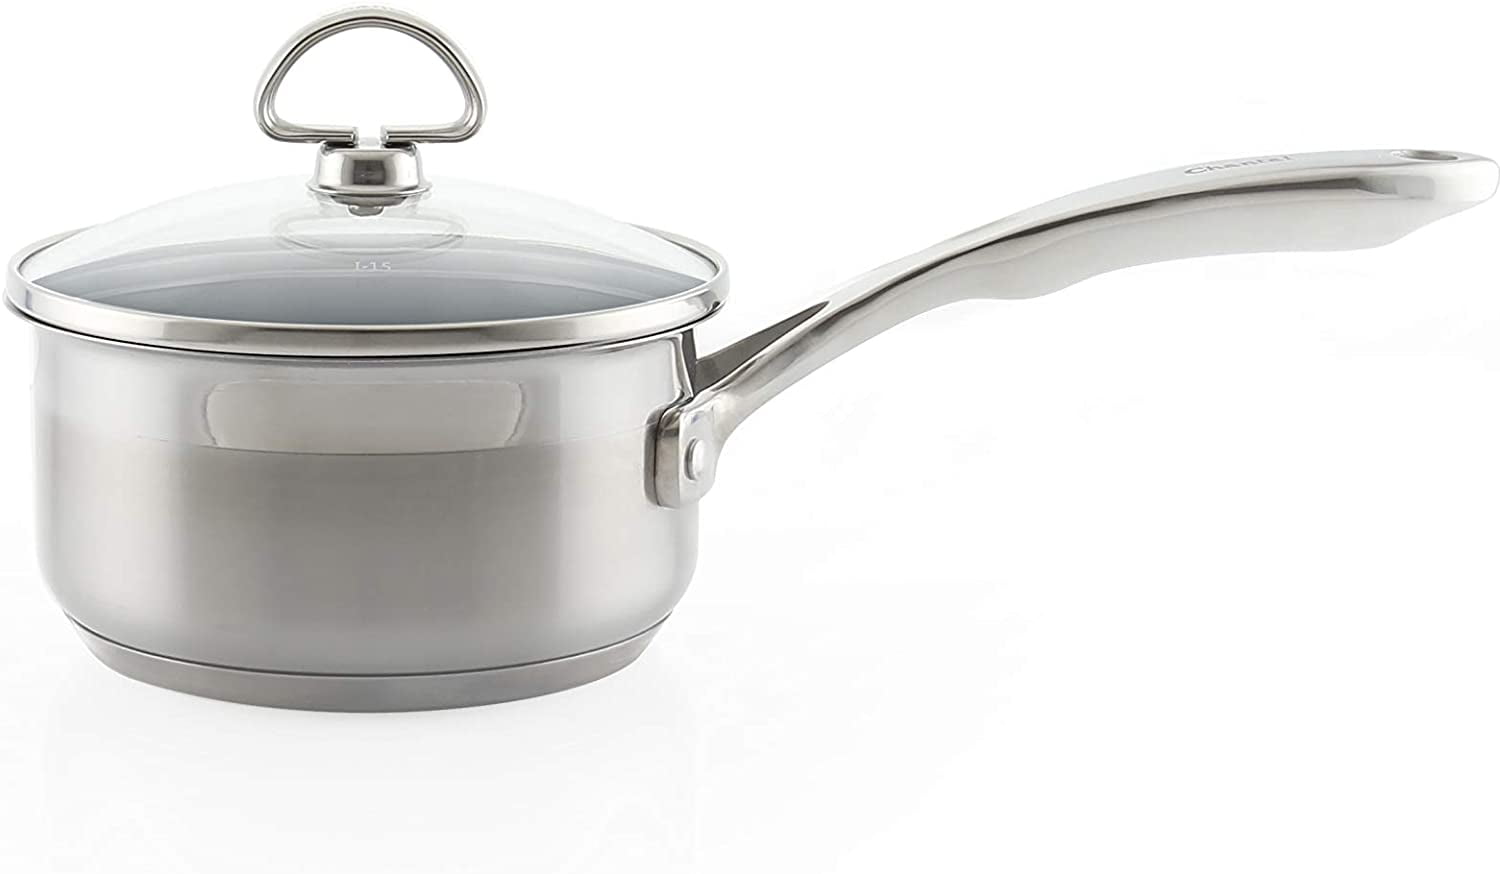 Chantal Induction 21 Steel 2.5 qt. Stainless Steel Pour-Spout Sauce Pan in  Brushed Stainless Steel with Strainer Glass Lid SLIN35-P18 - The Home Depot